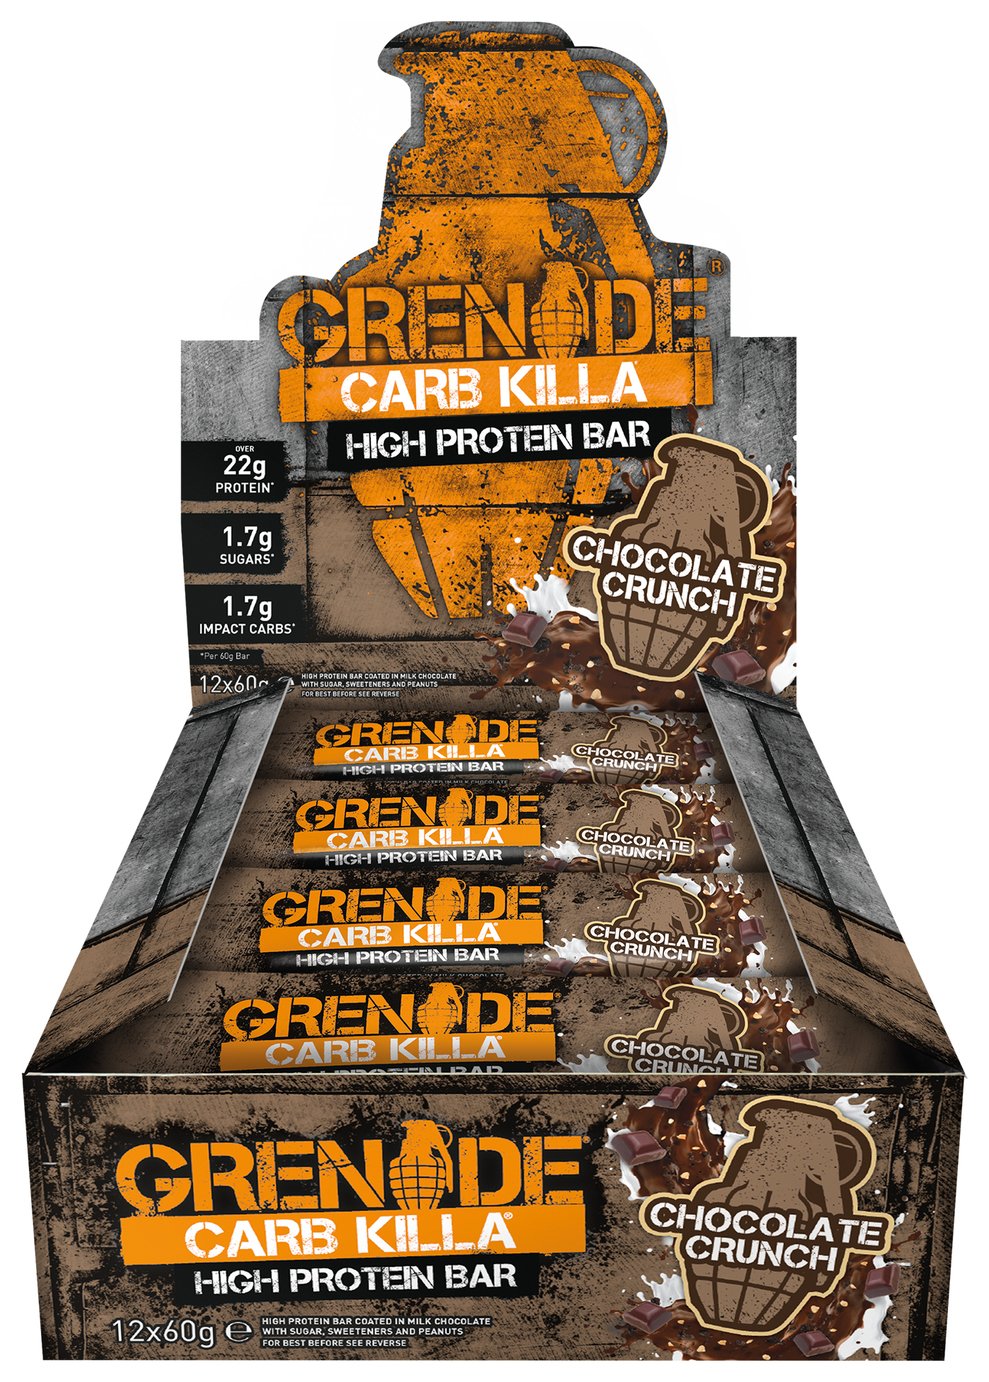 Grenade Carb Killa Chocolate Crunch Protein Bars review